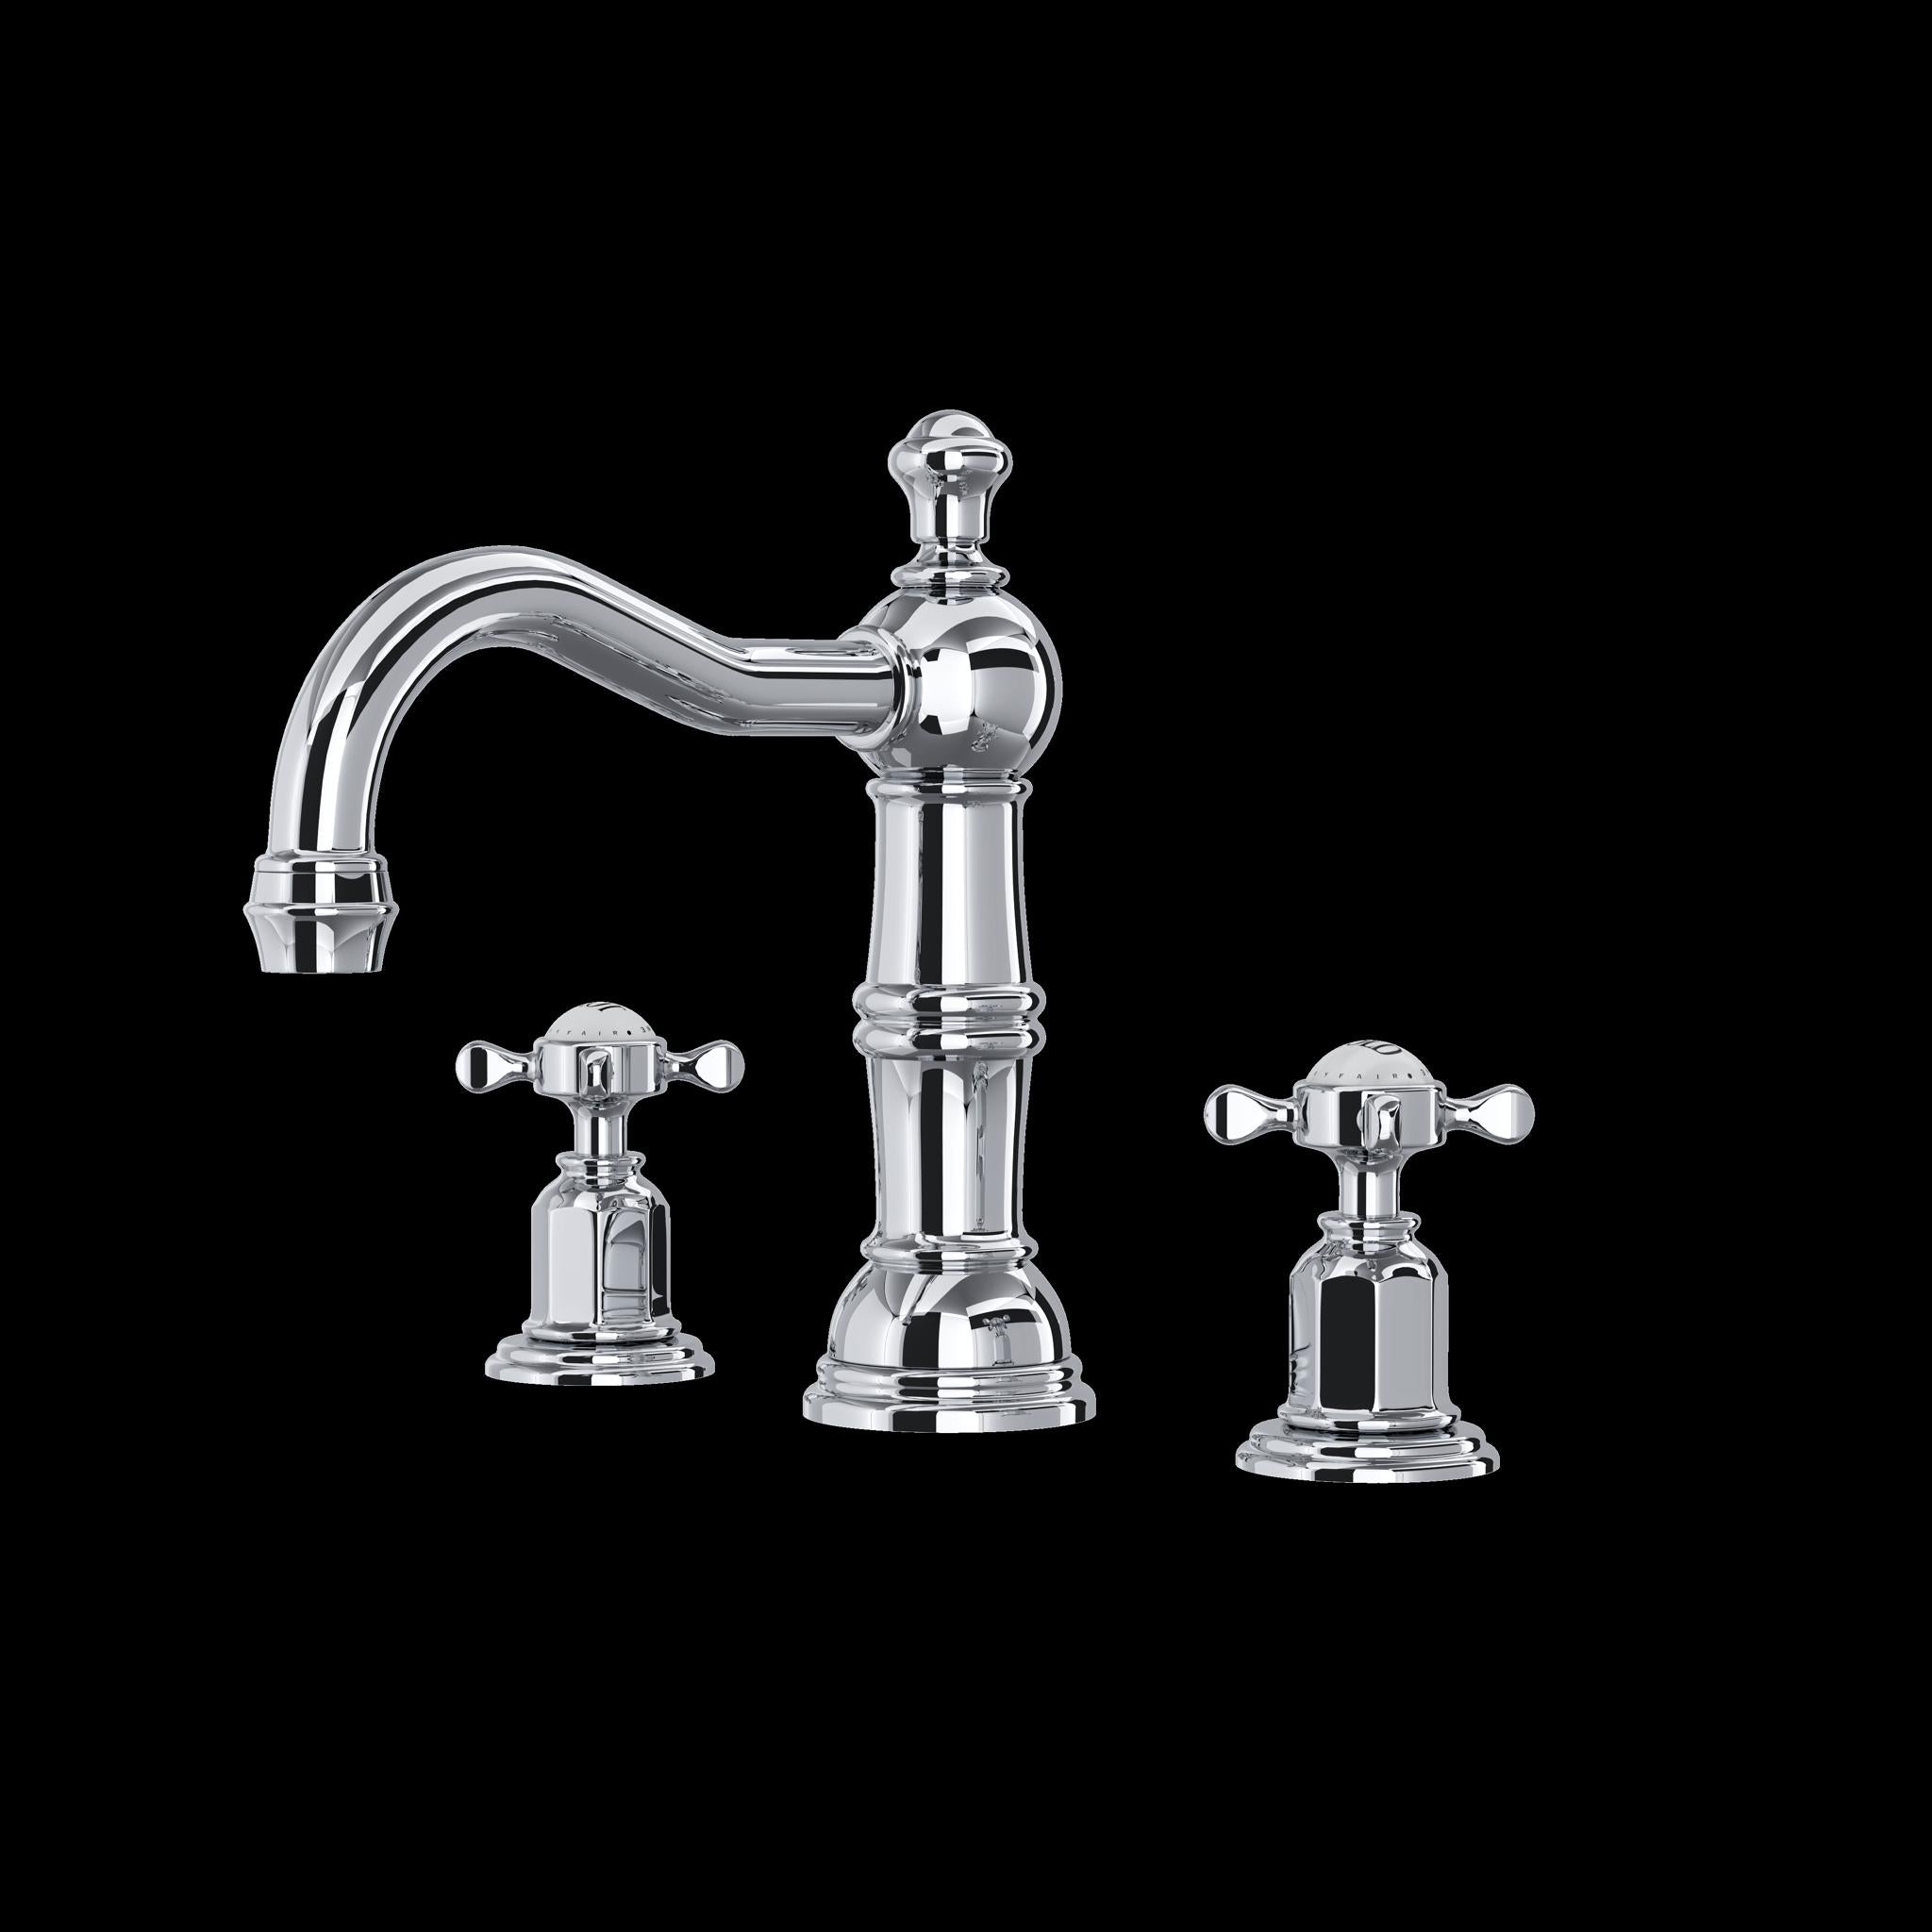 Perrin & Rowe U.3721 Edwardian Widespread Lavatory Faucet With Column Spout